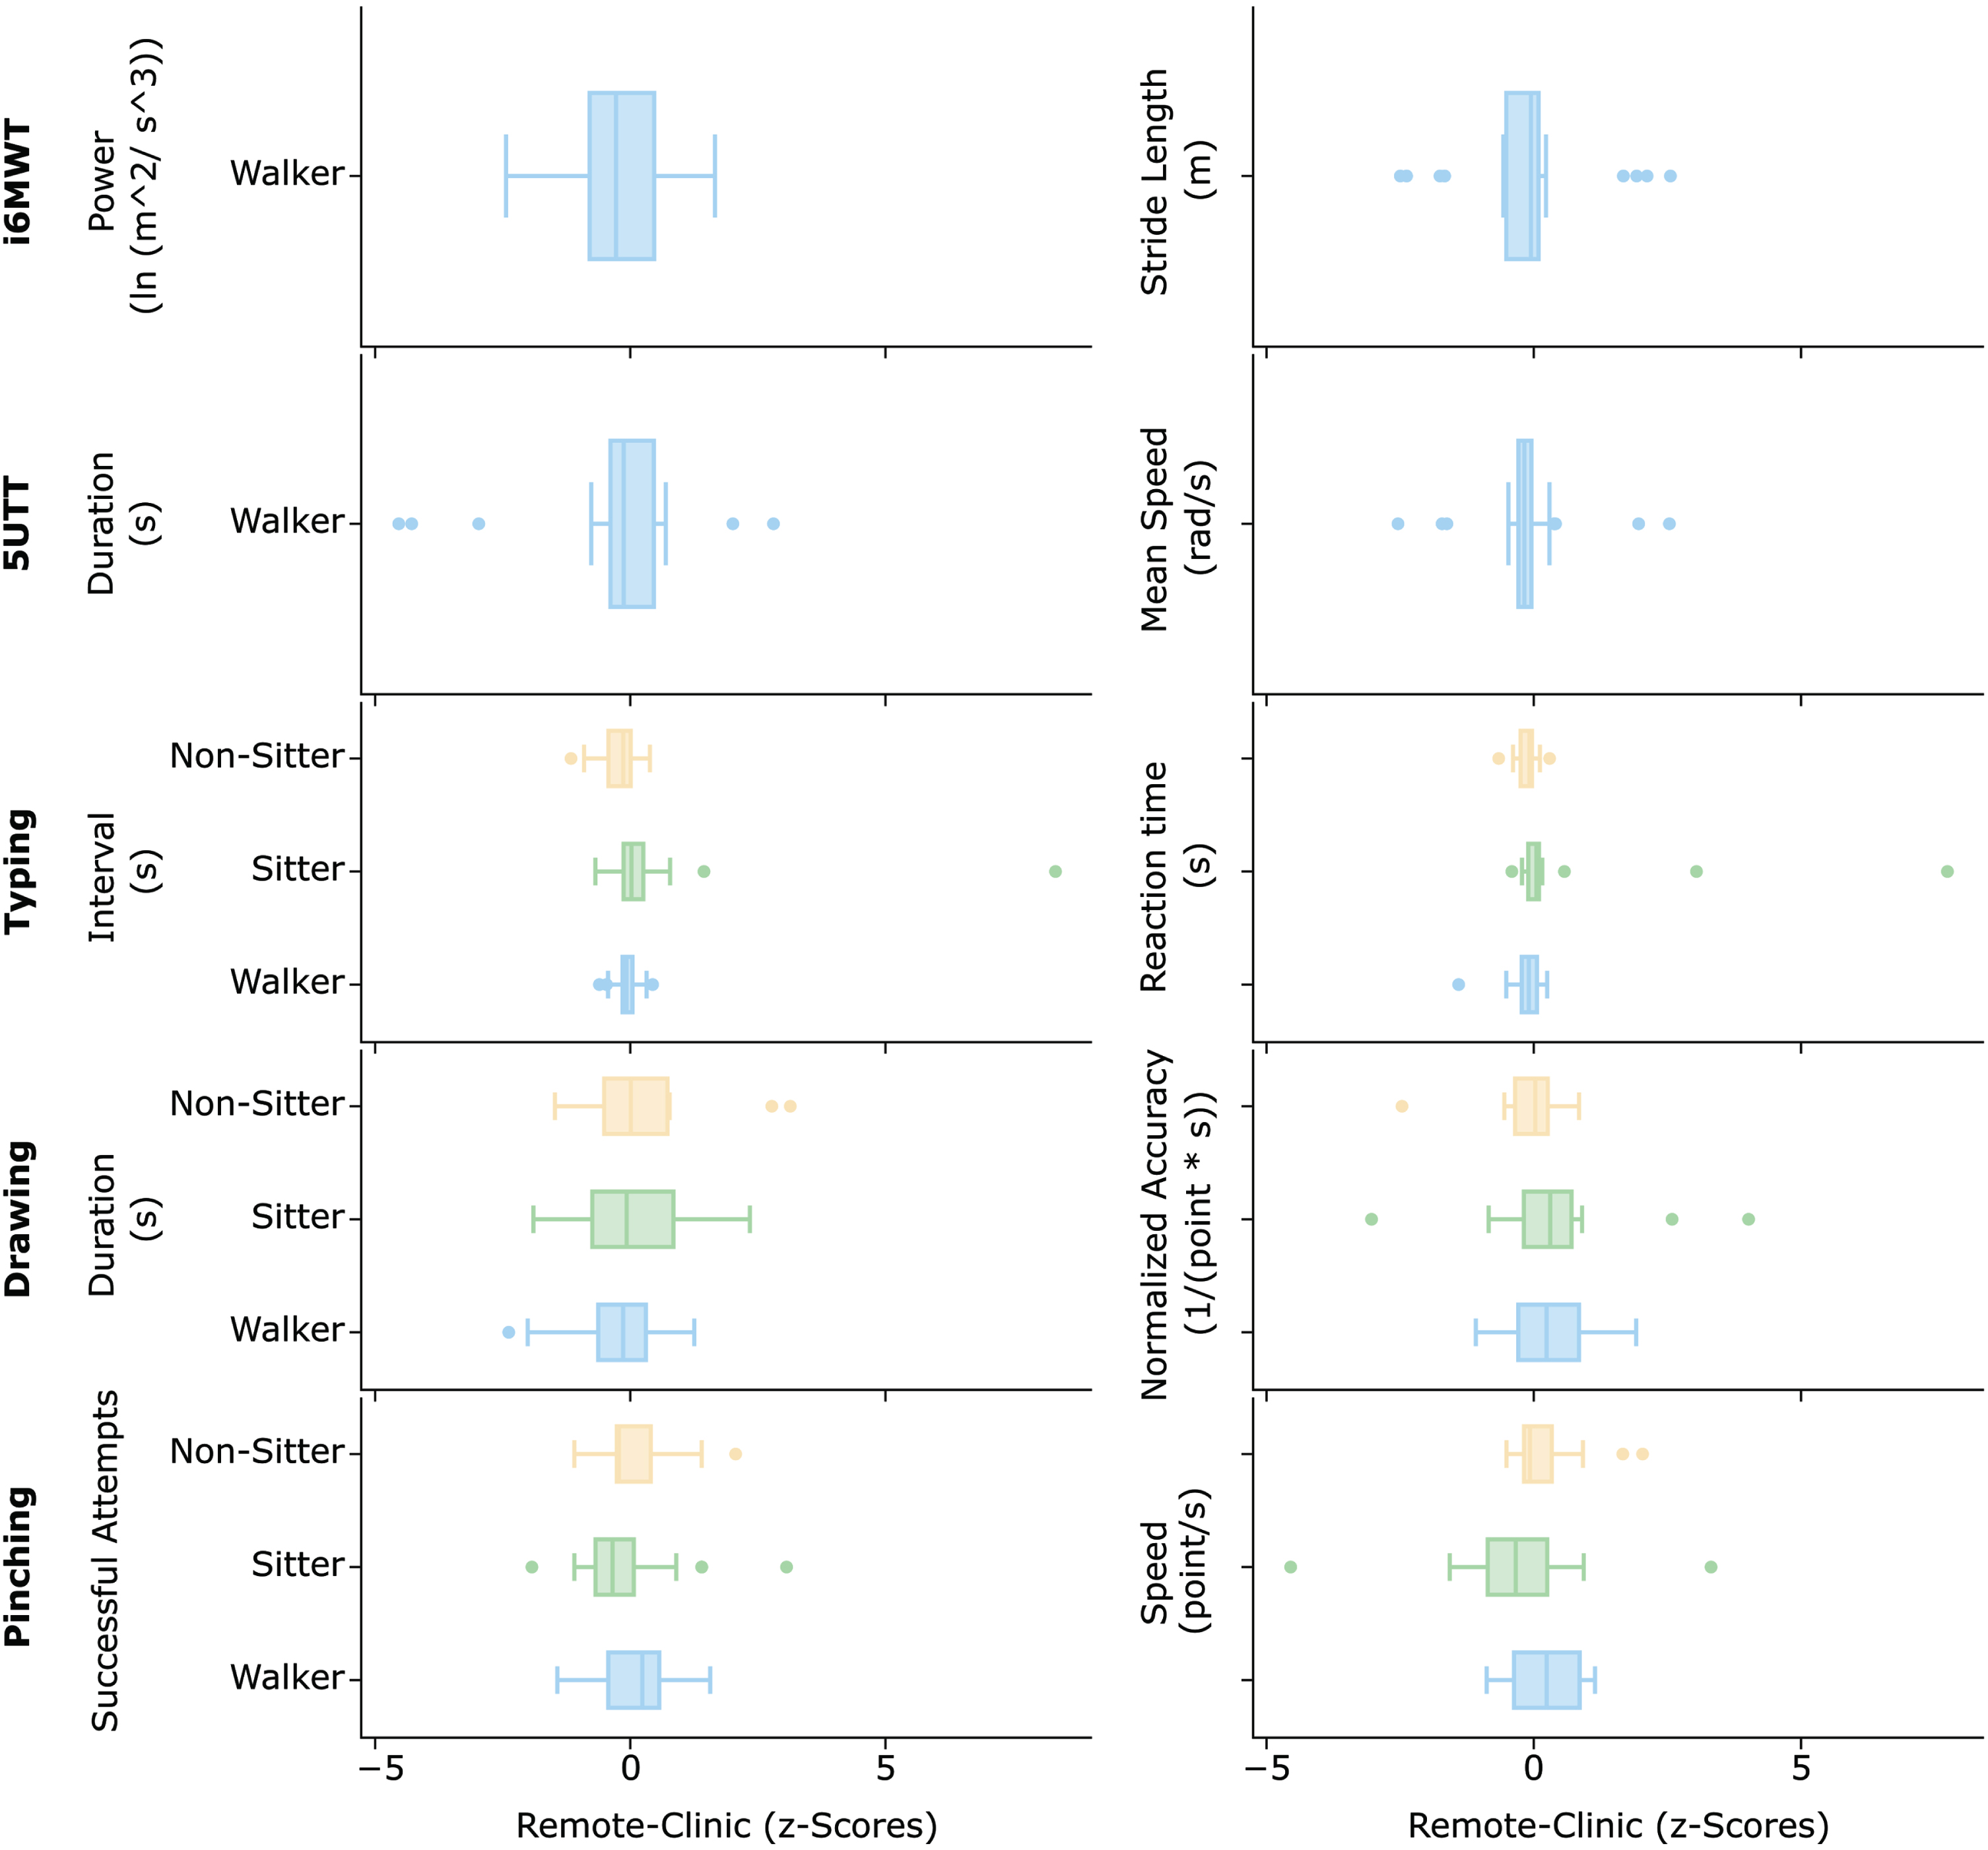 Changes in the SDMs values when comparing data collected in-clinic (median between V1 and V2) and the remote environment (median across all valid remotes). The horizontal boxes represent the distribution of the values calculated for each subject in each of the three groups.